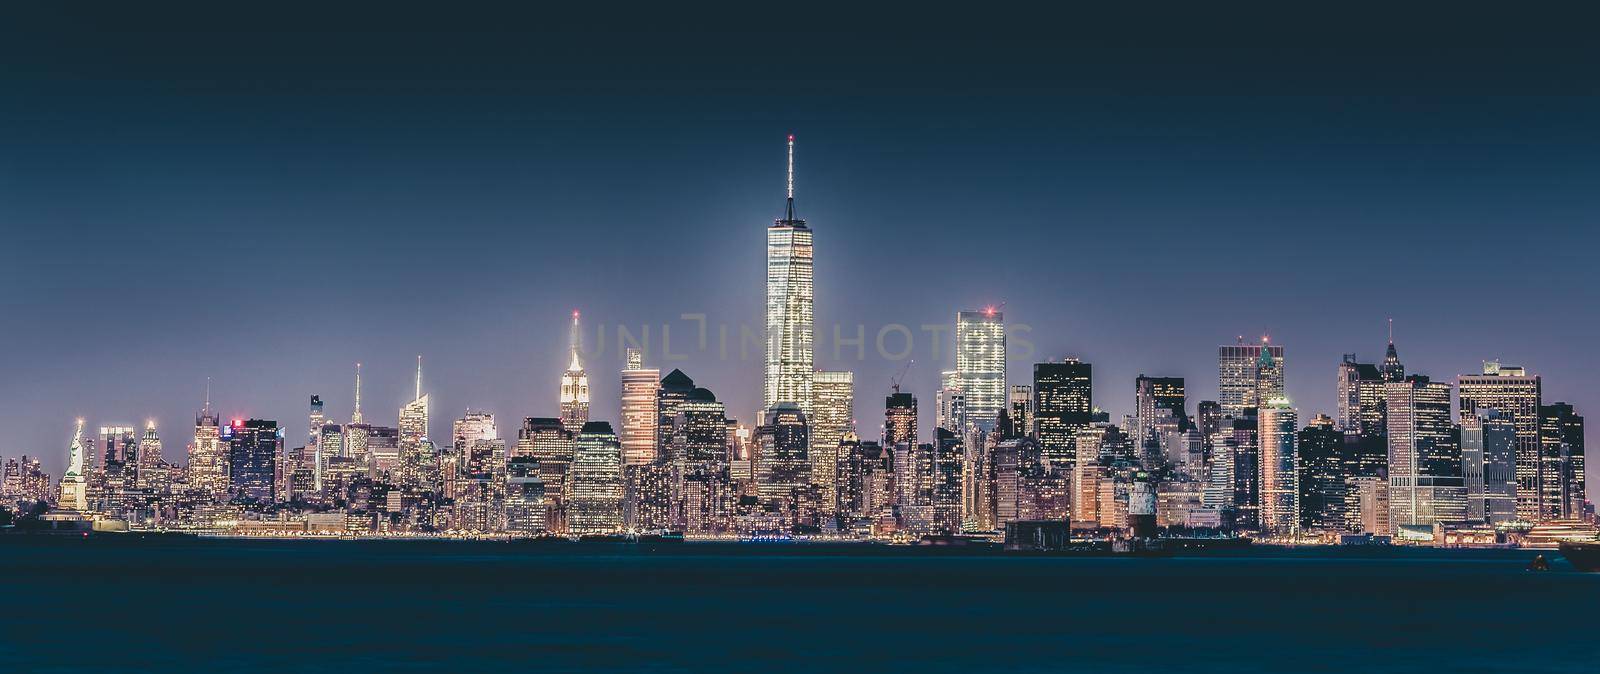 New York City Manhattan downtown skyline at dusk with skyscrapers illuminated over Hudson River panorama. by kasto